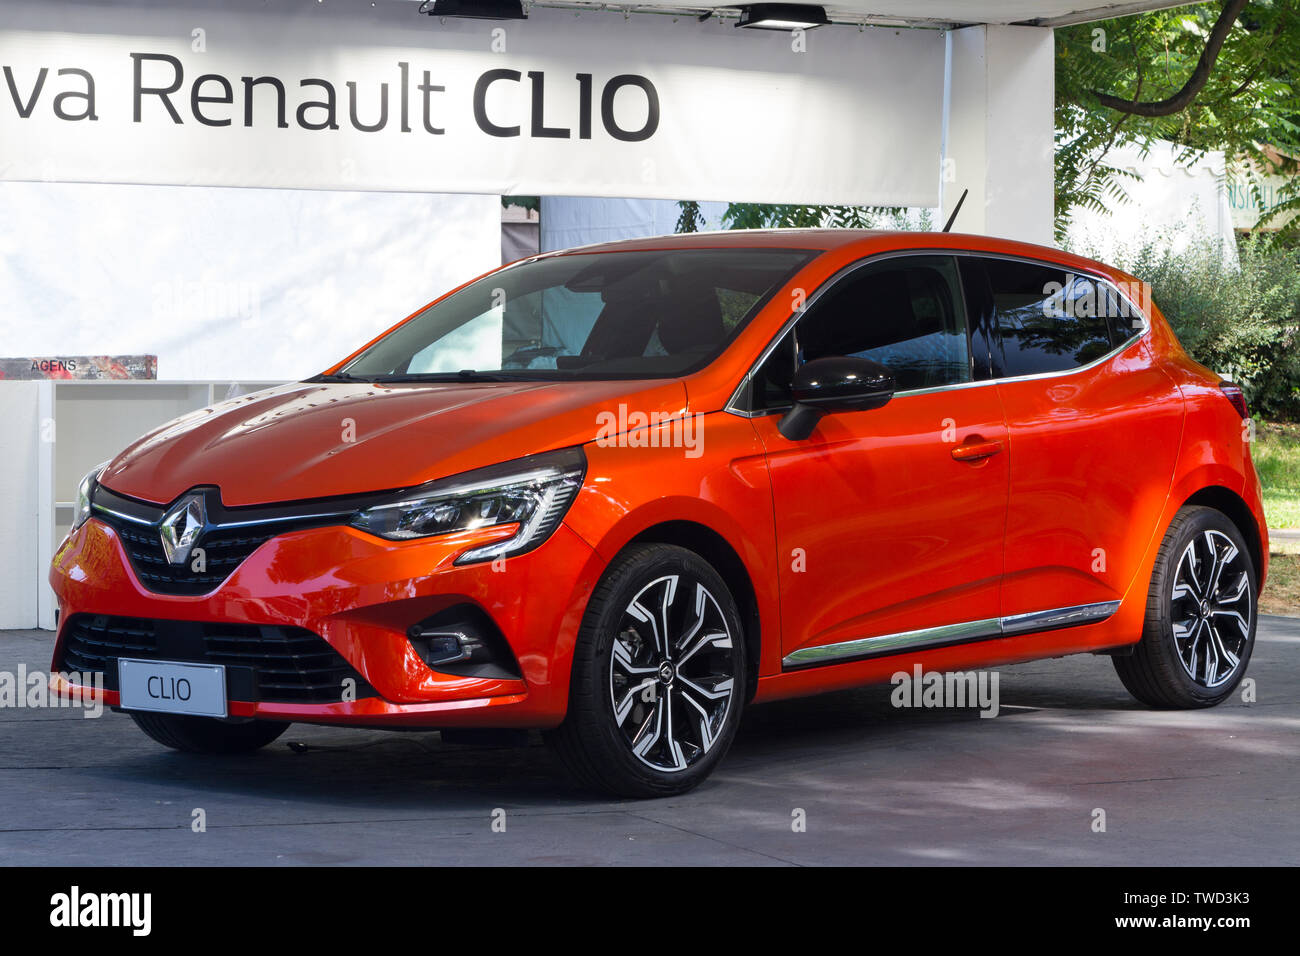 A Renault Clio. 2019 edition of Parco Valentino car show hosts cars by many brands and car designers in Valentino Park in Torino, Italy. Stock Photo